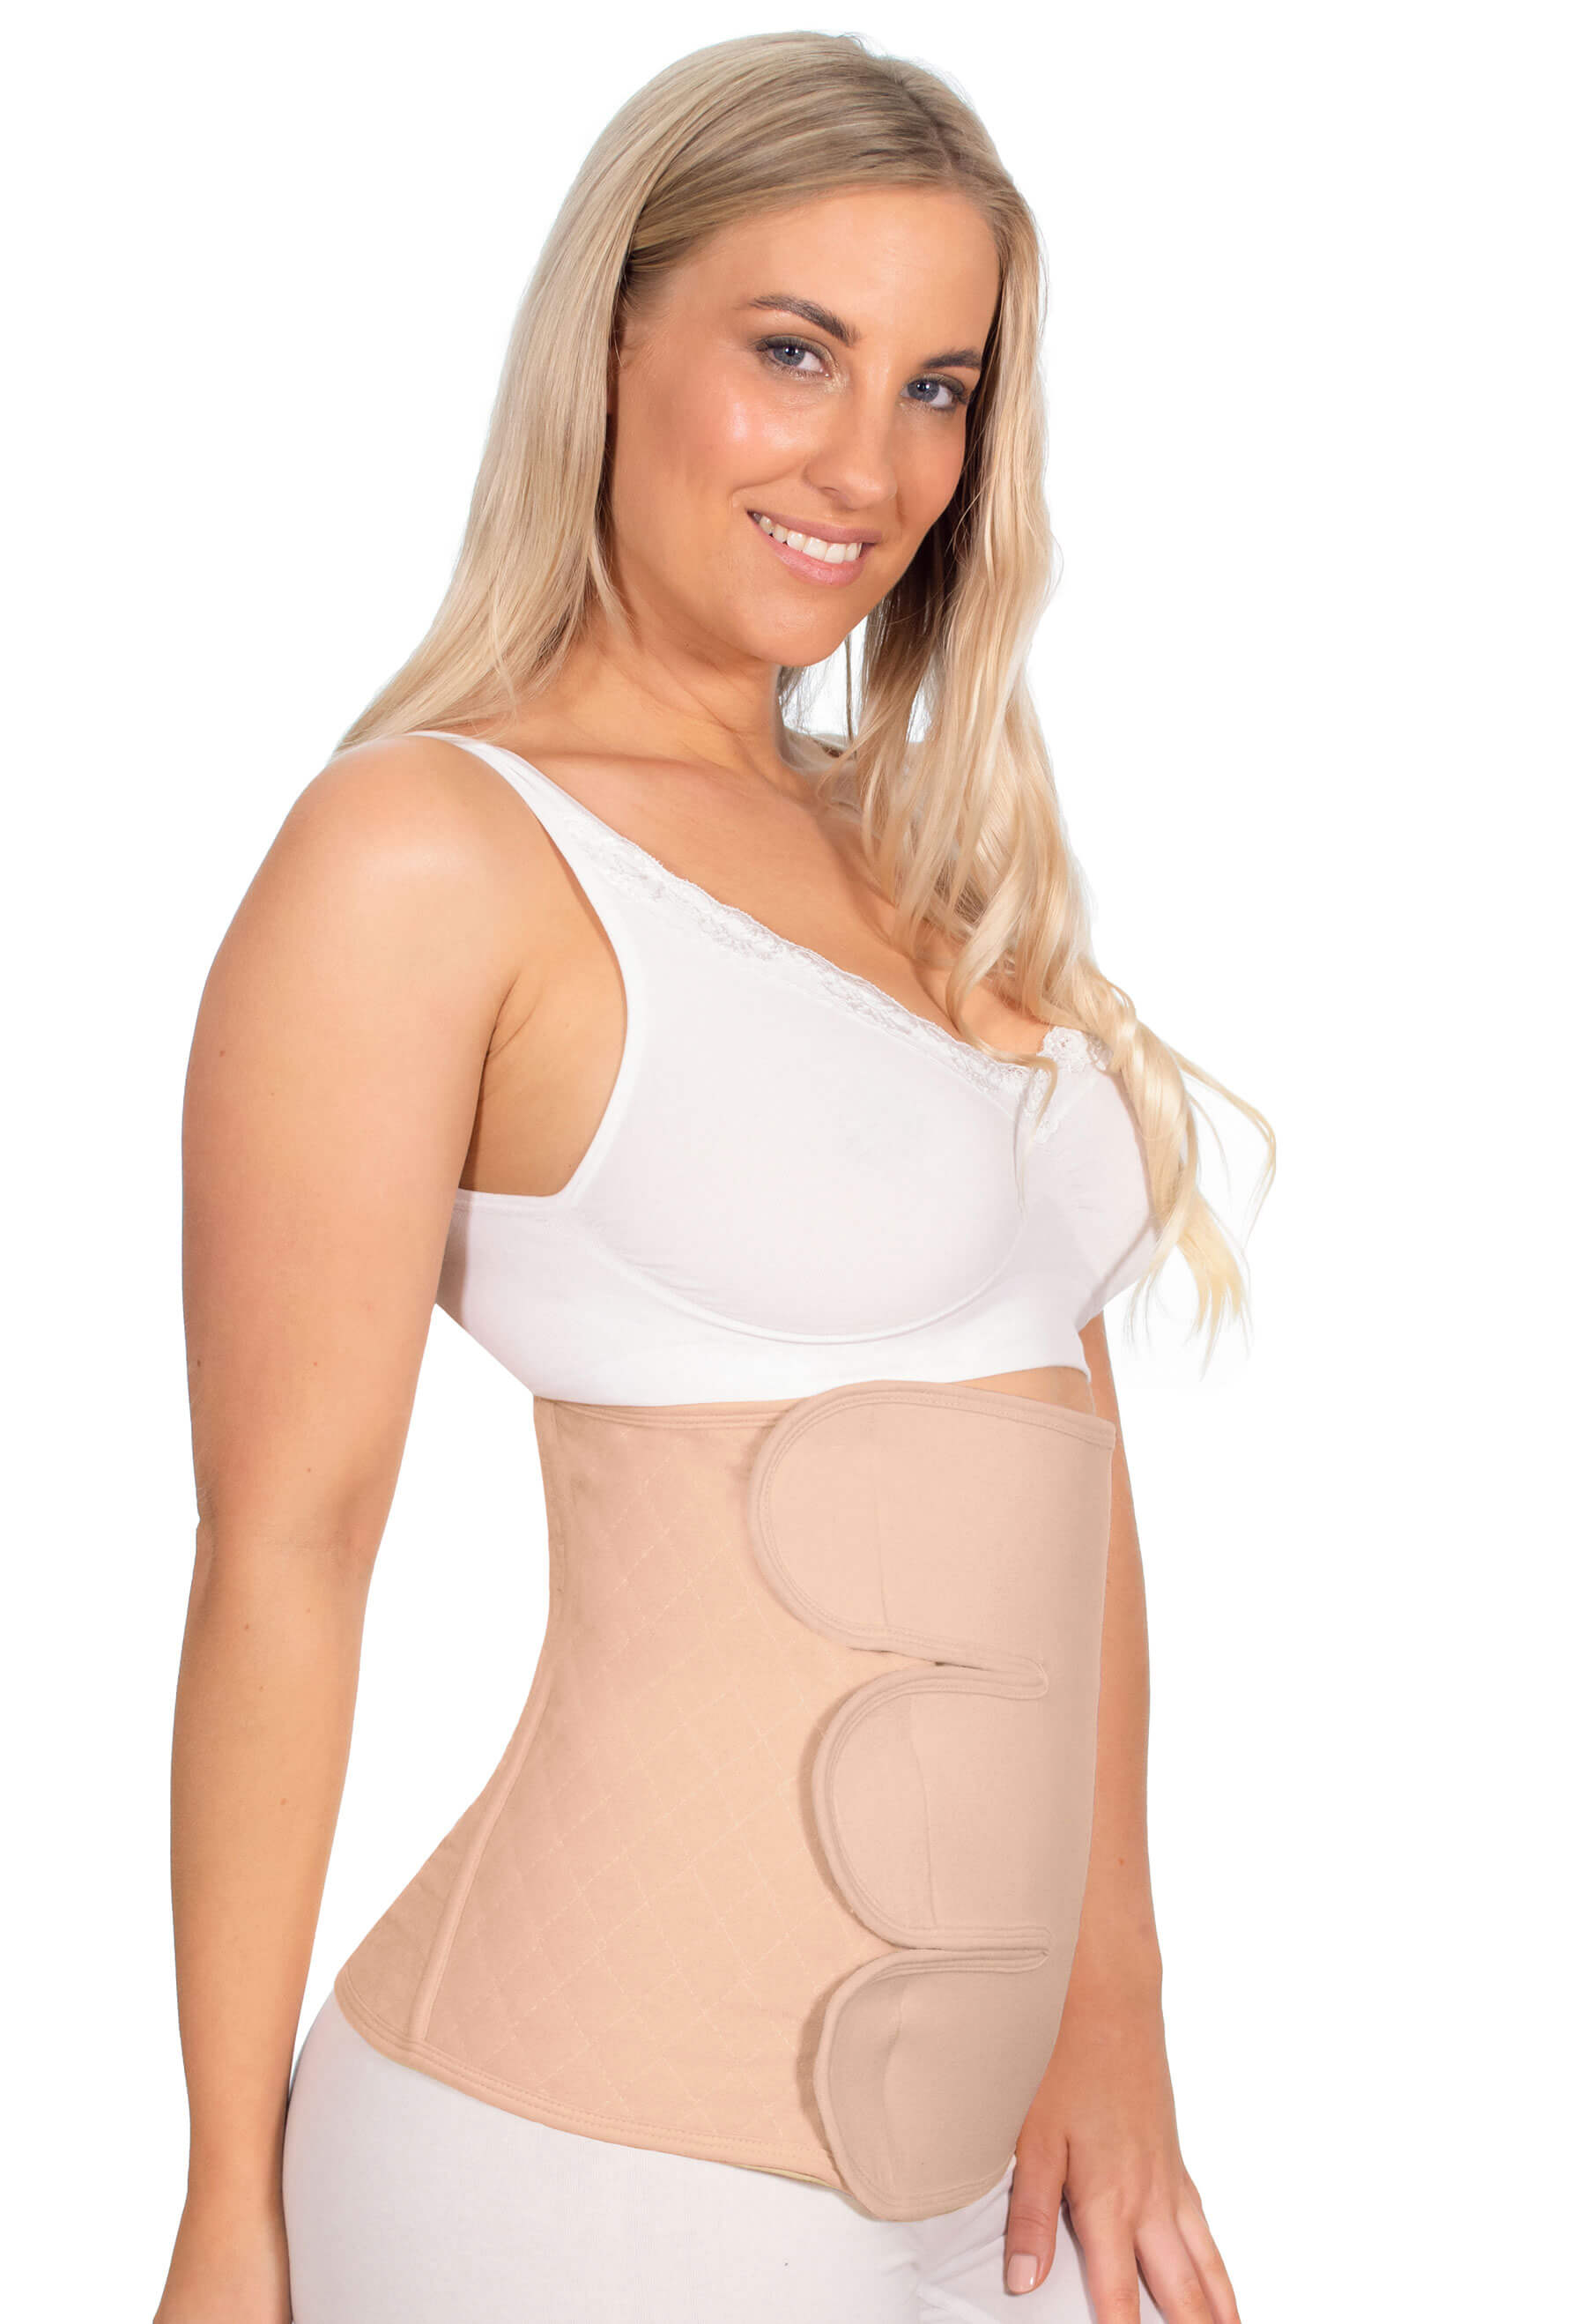 Here's what belly binding can do for your postpartum body